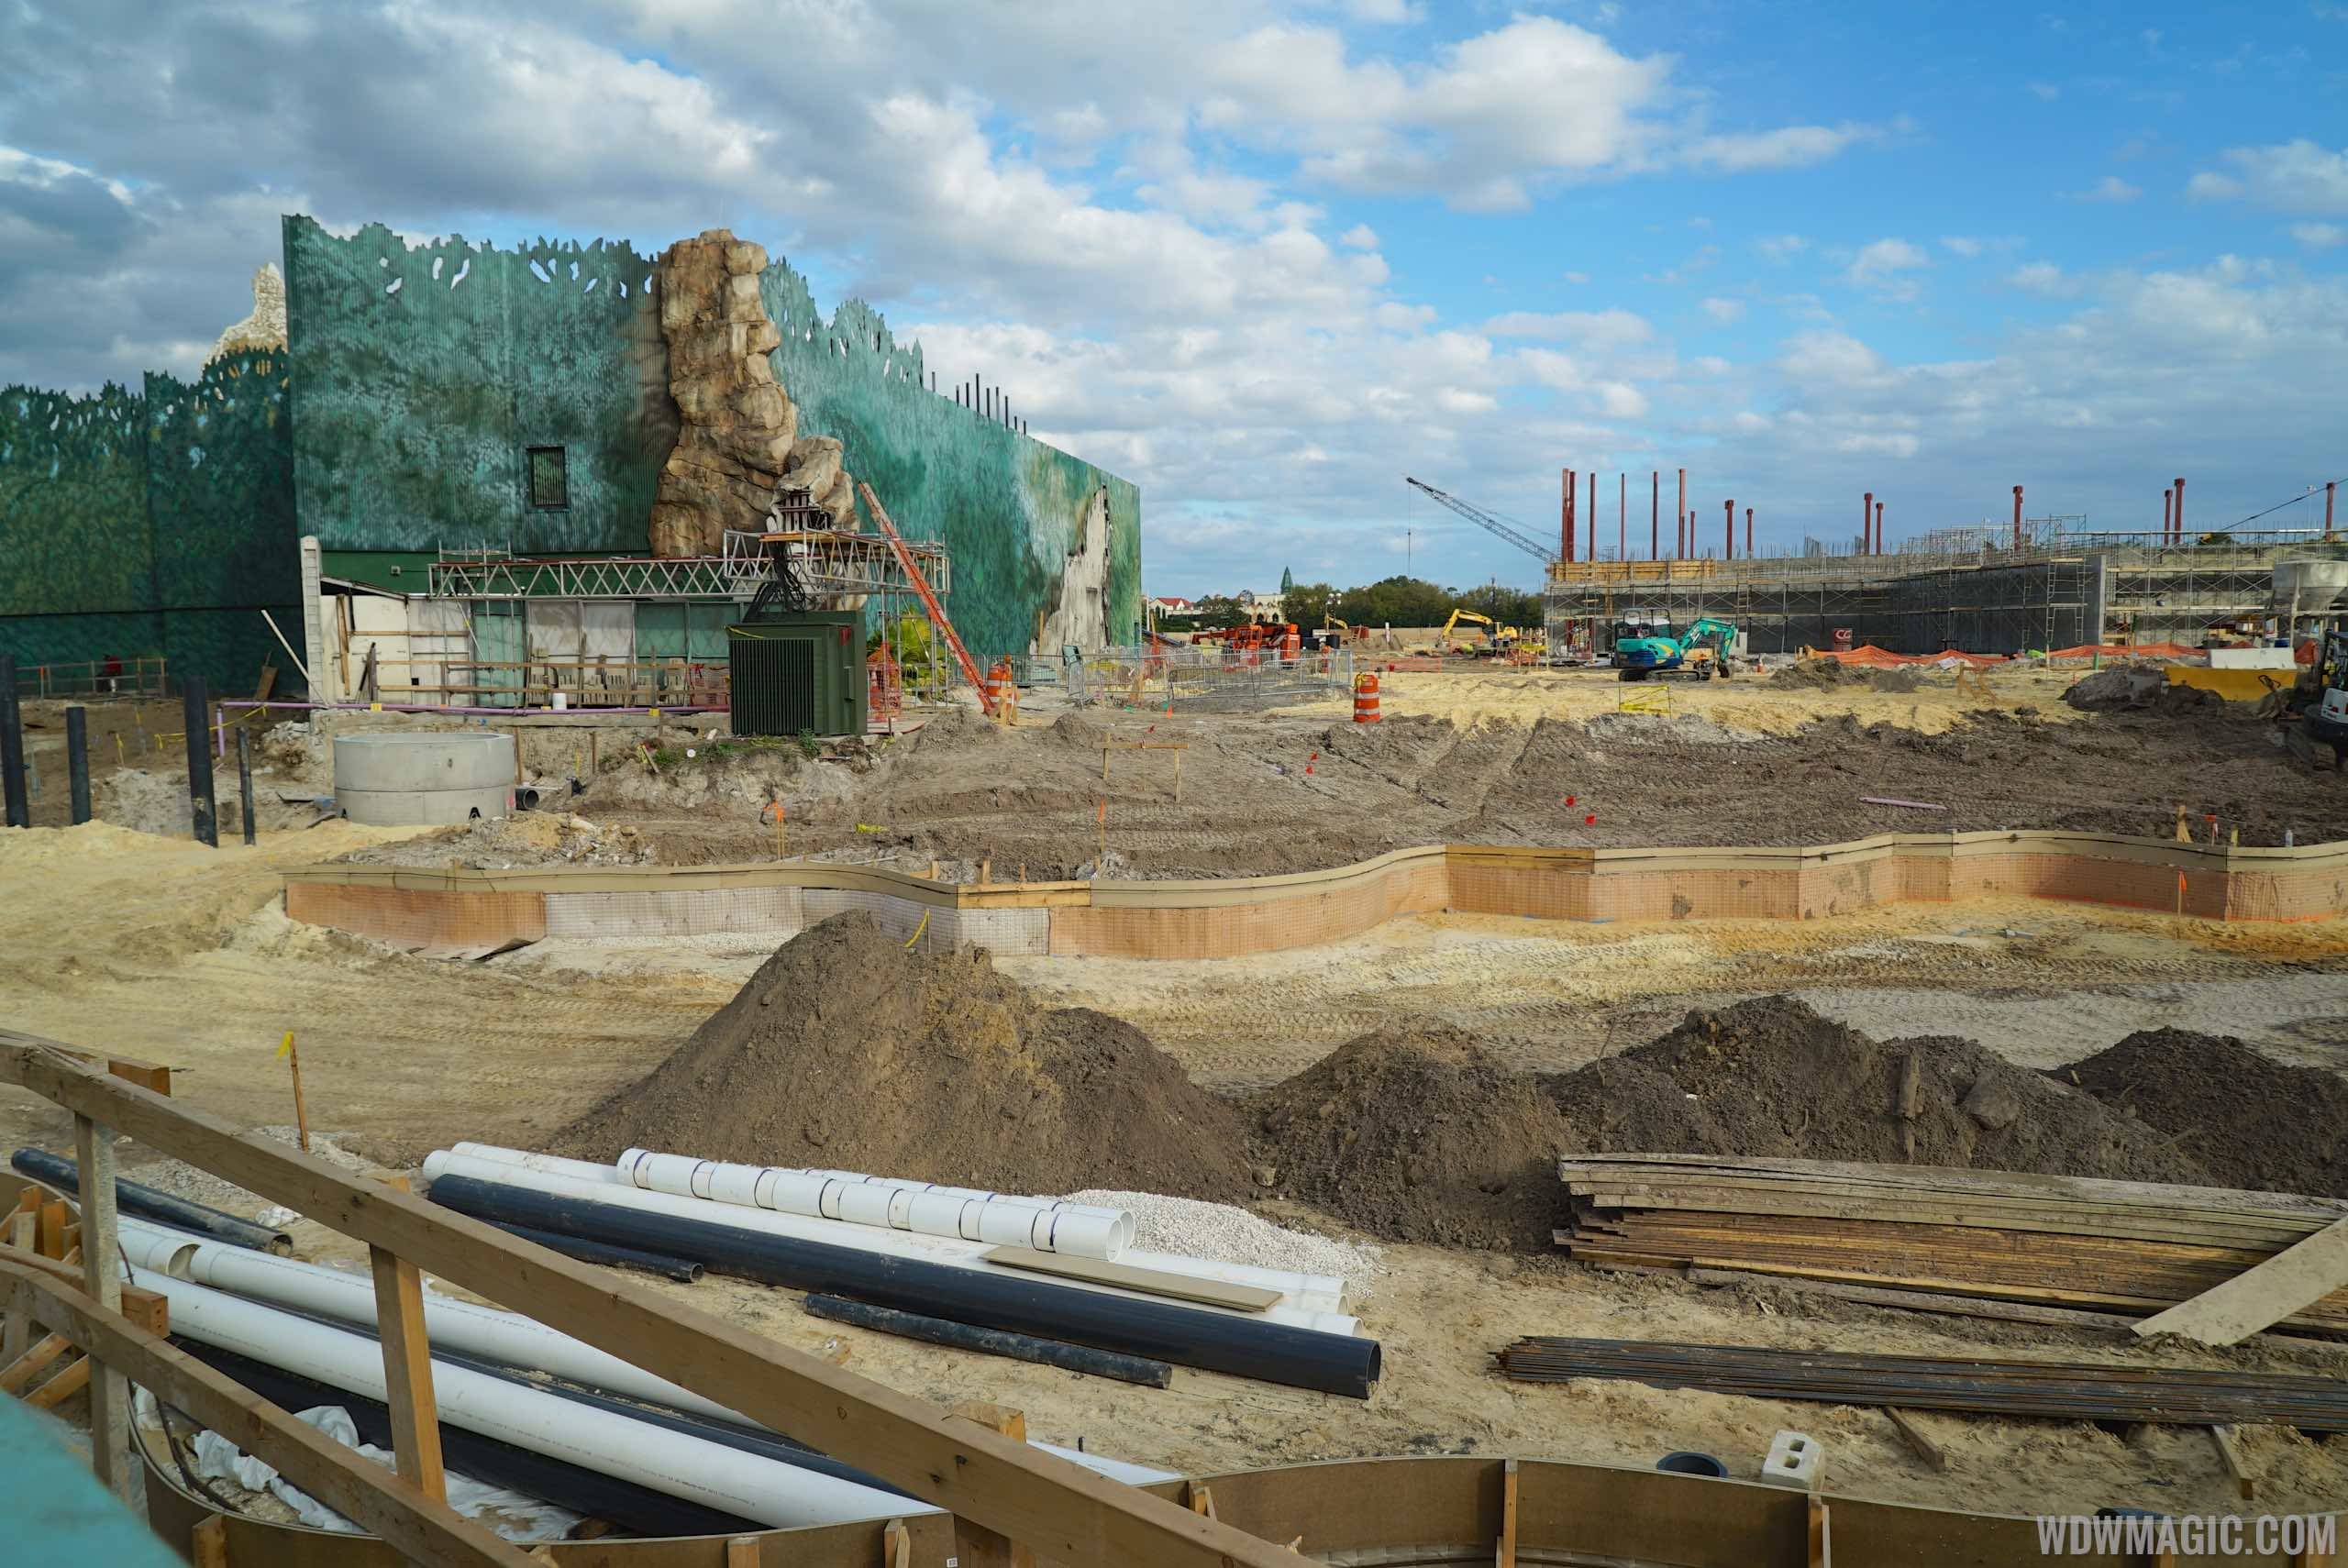 PHOTOS - The Town Center begins to take shape at Disney Springs